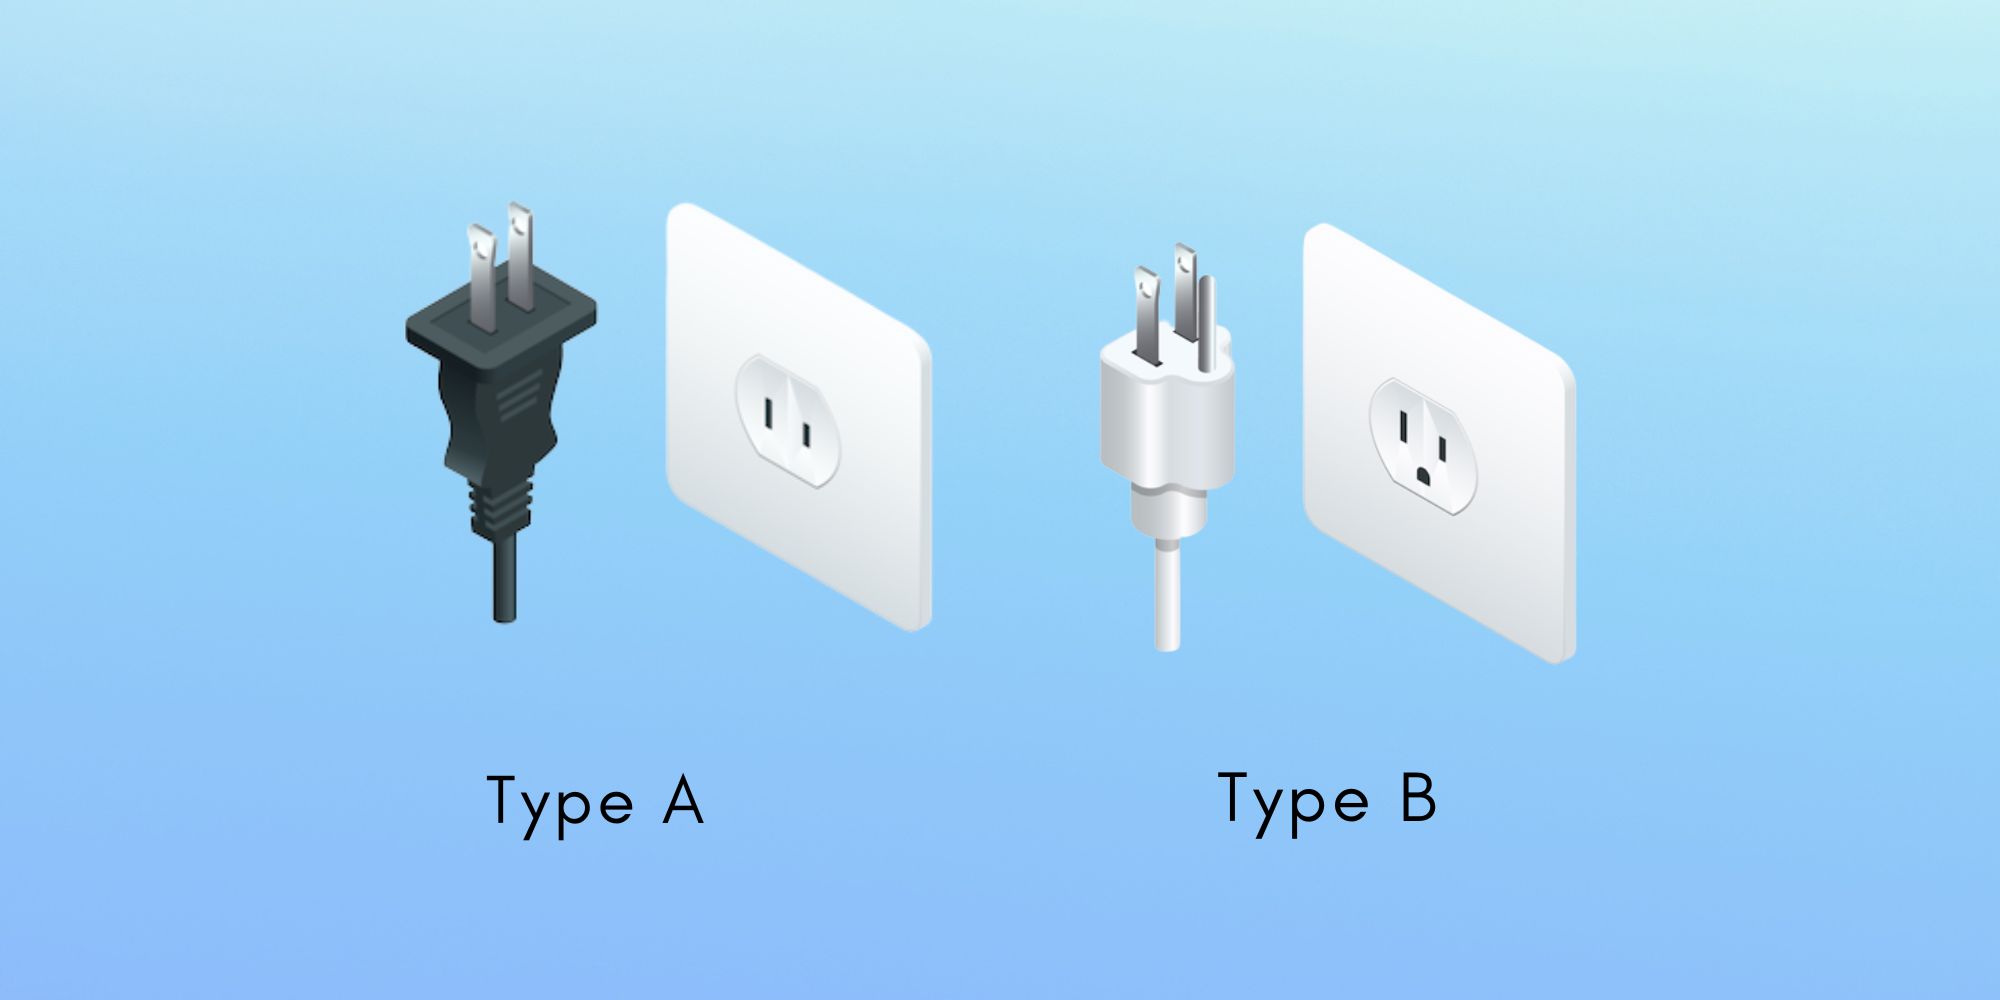 Palau Power Plugs and Sockets: Type A and Type B
